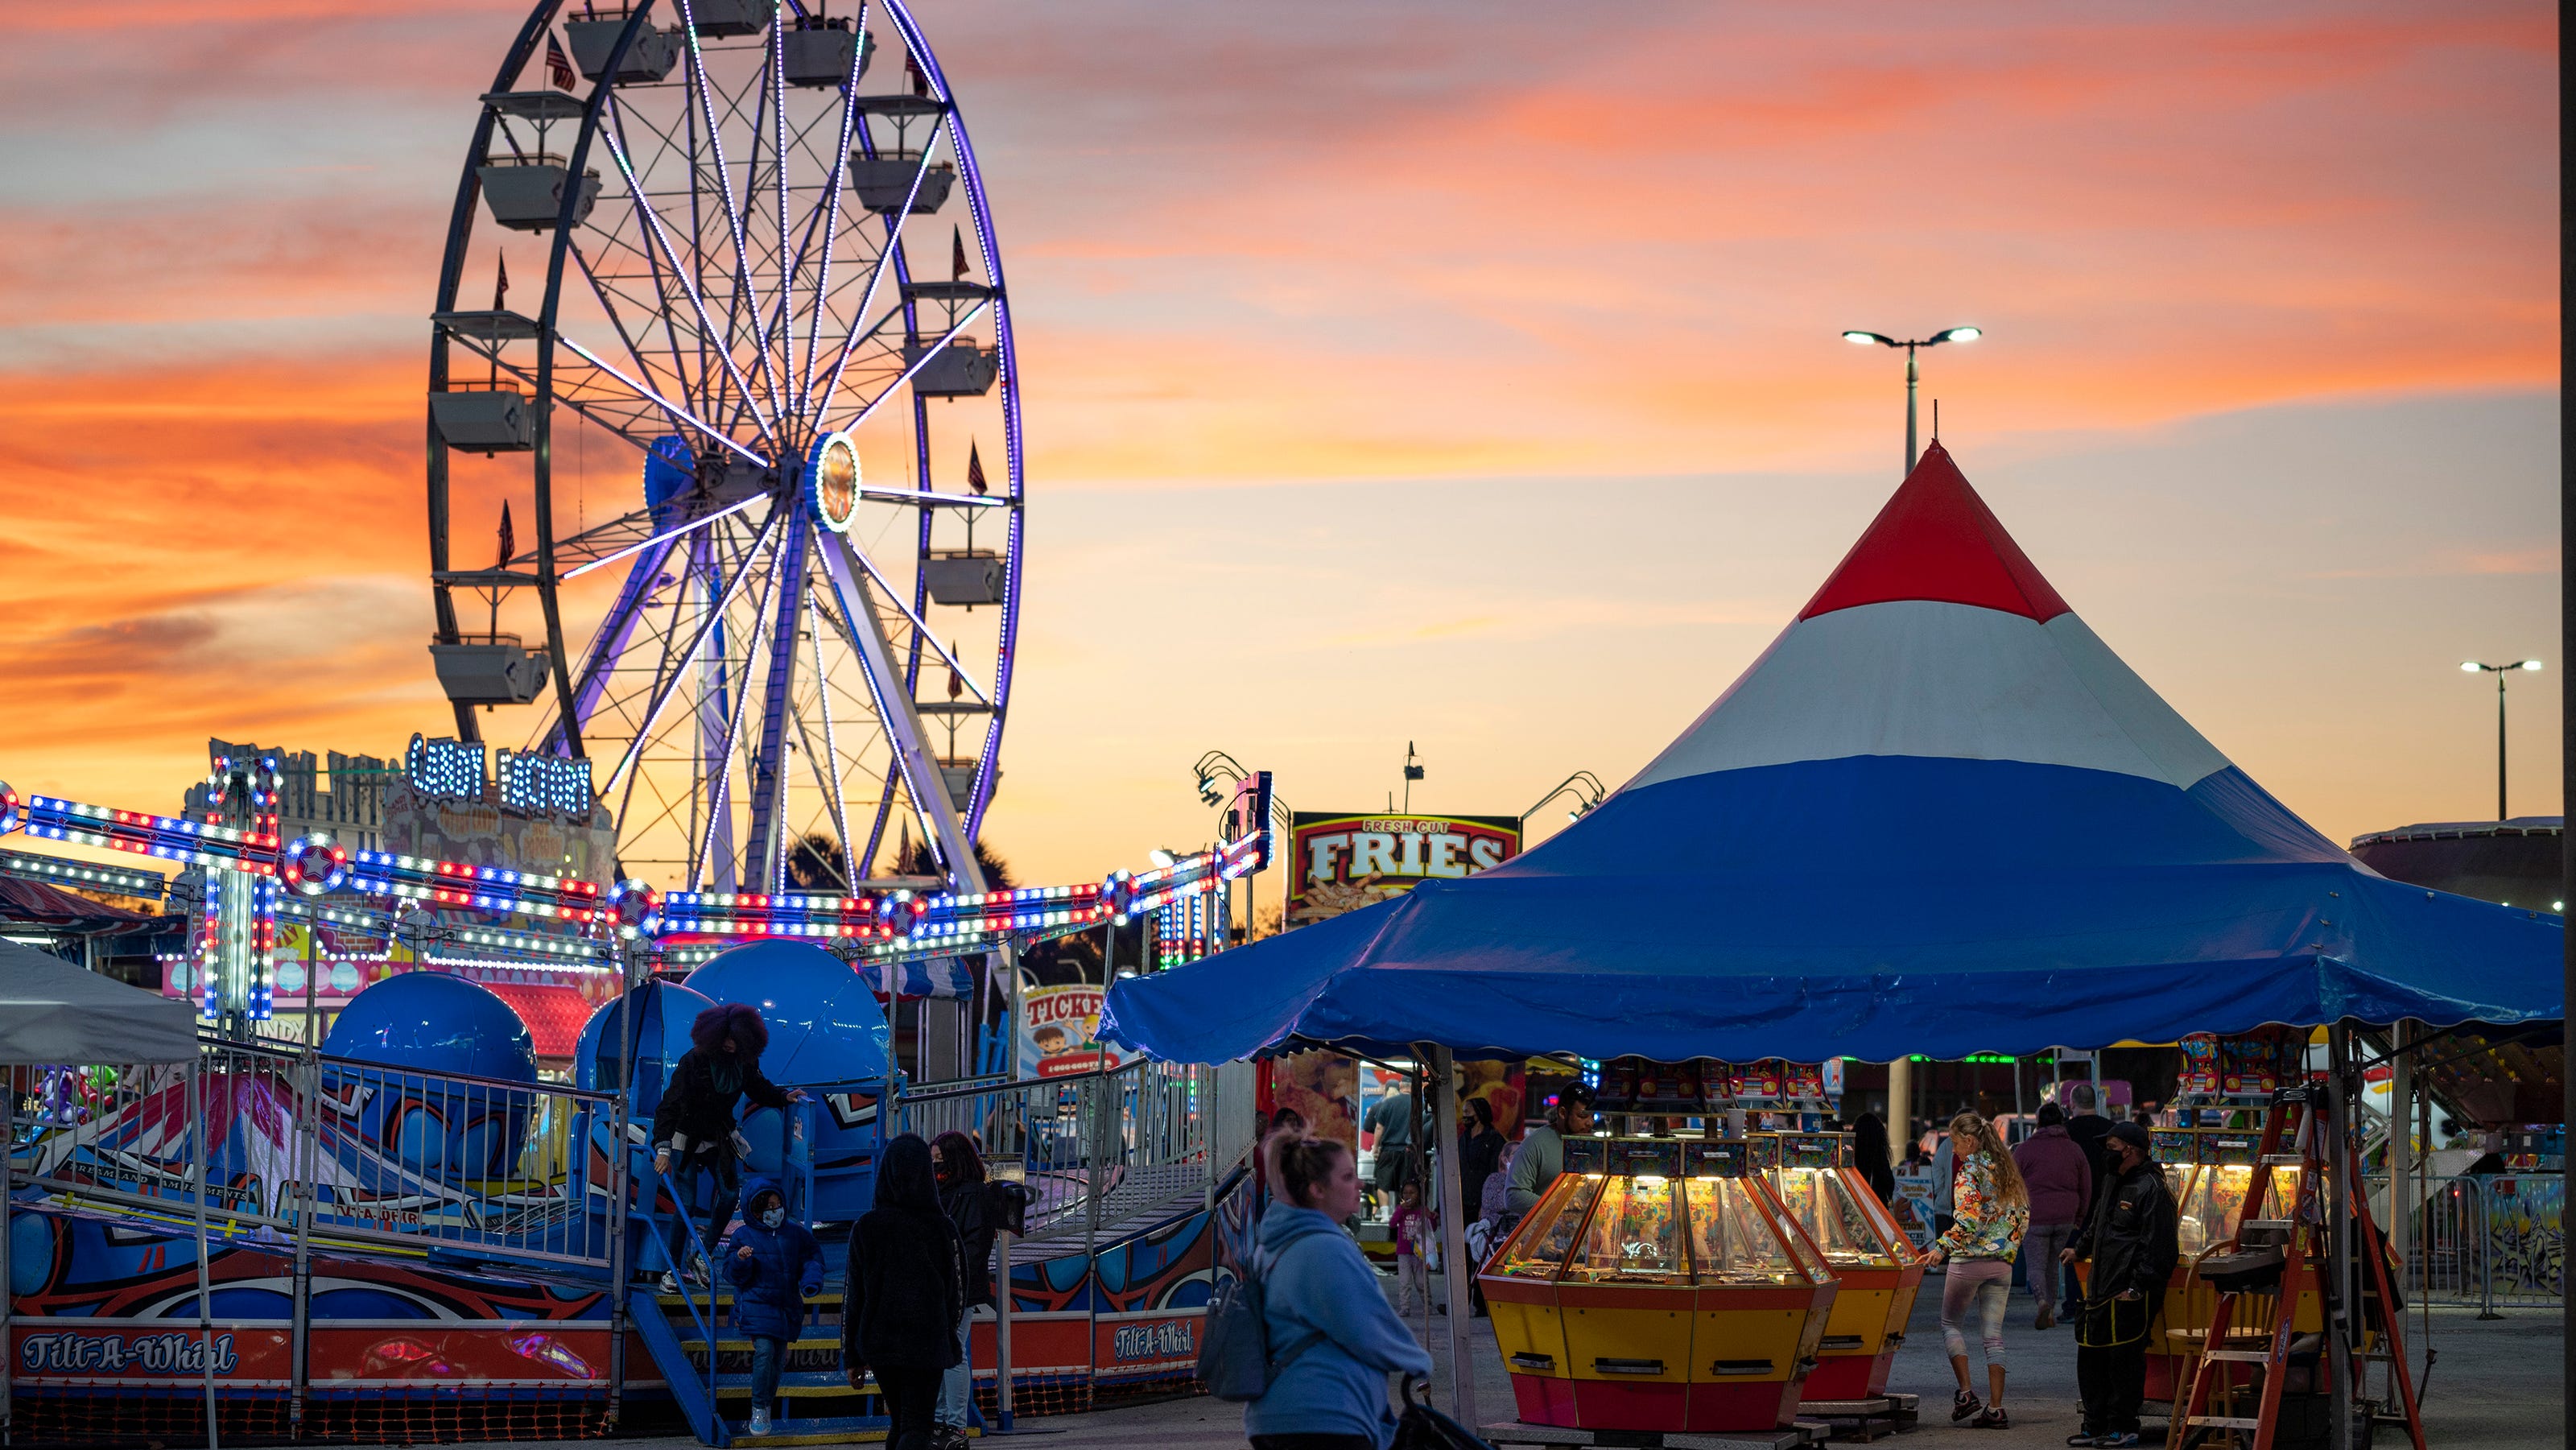 Leesburg's Lake Square Mall Carnival extended through this weekend